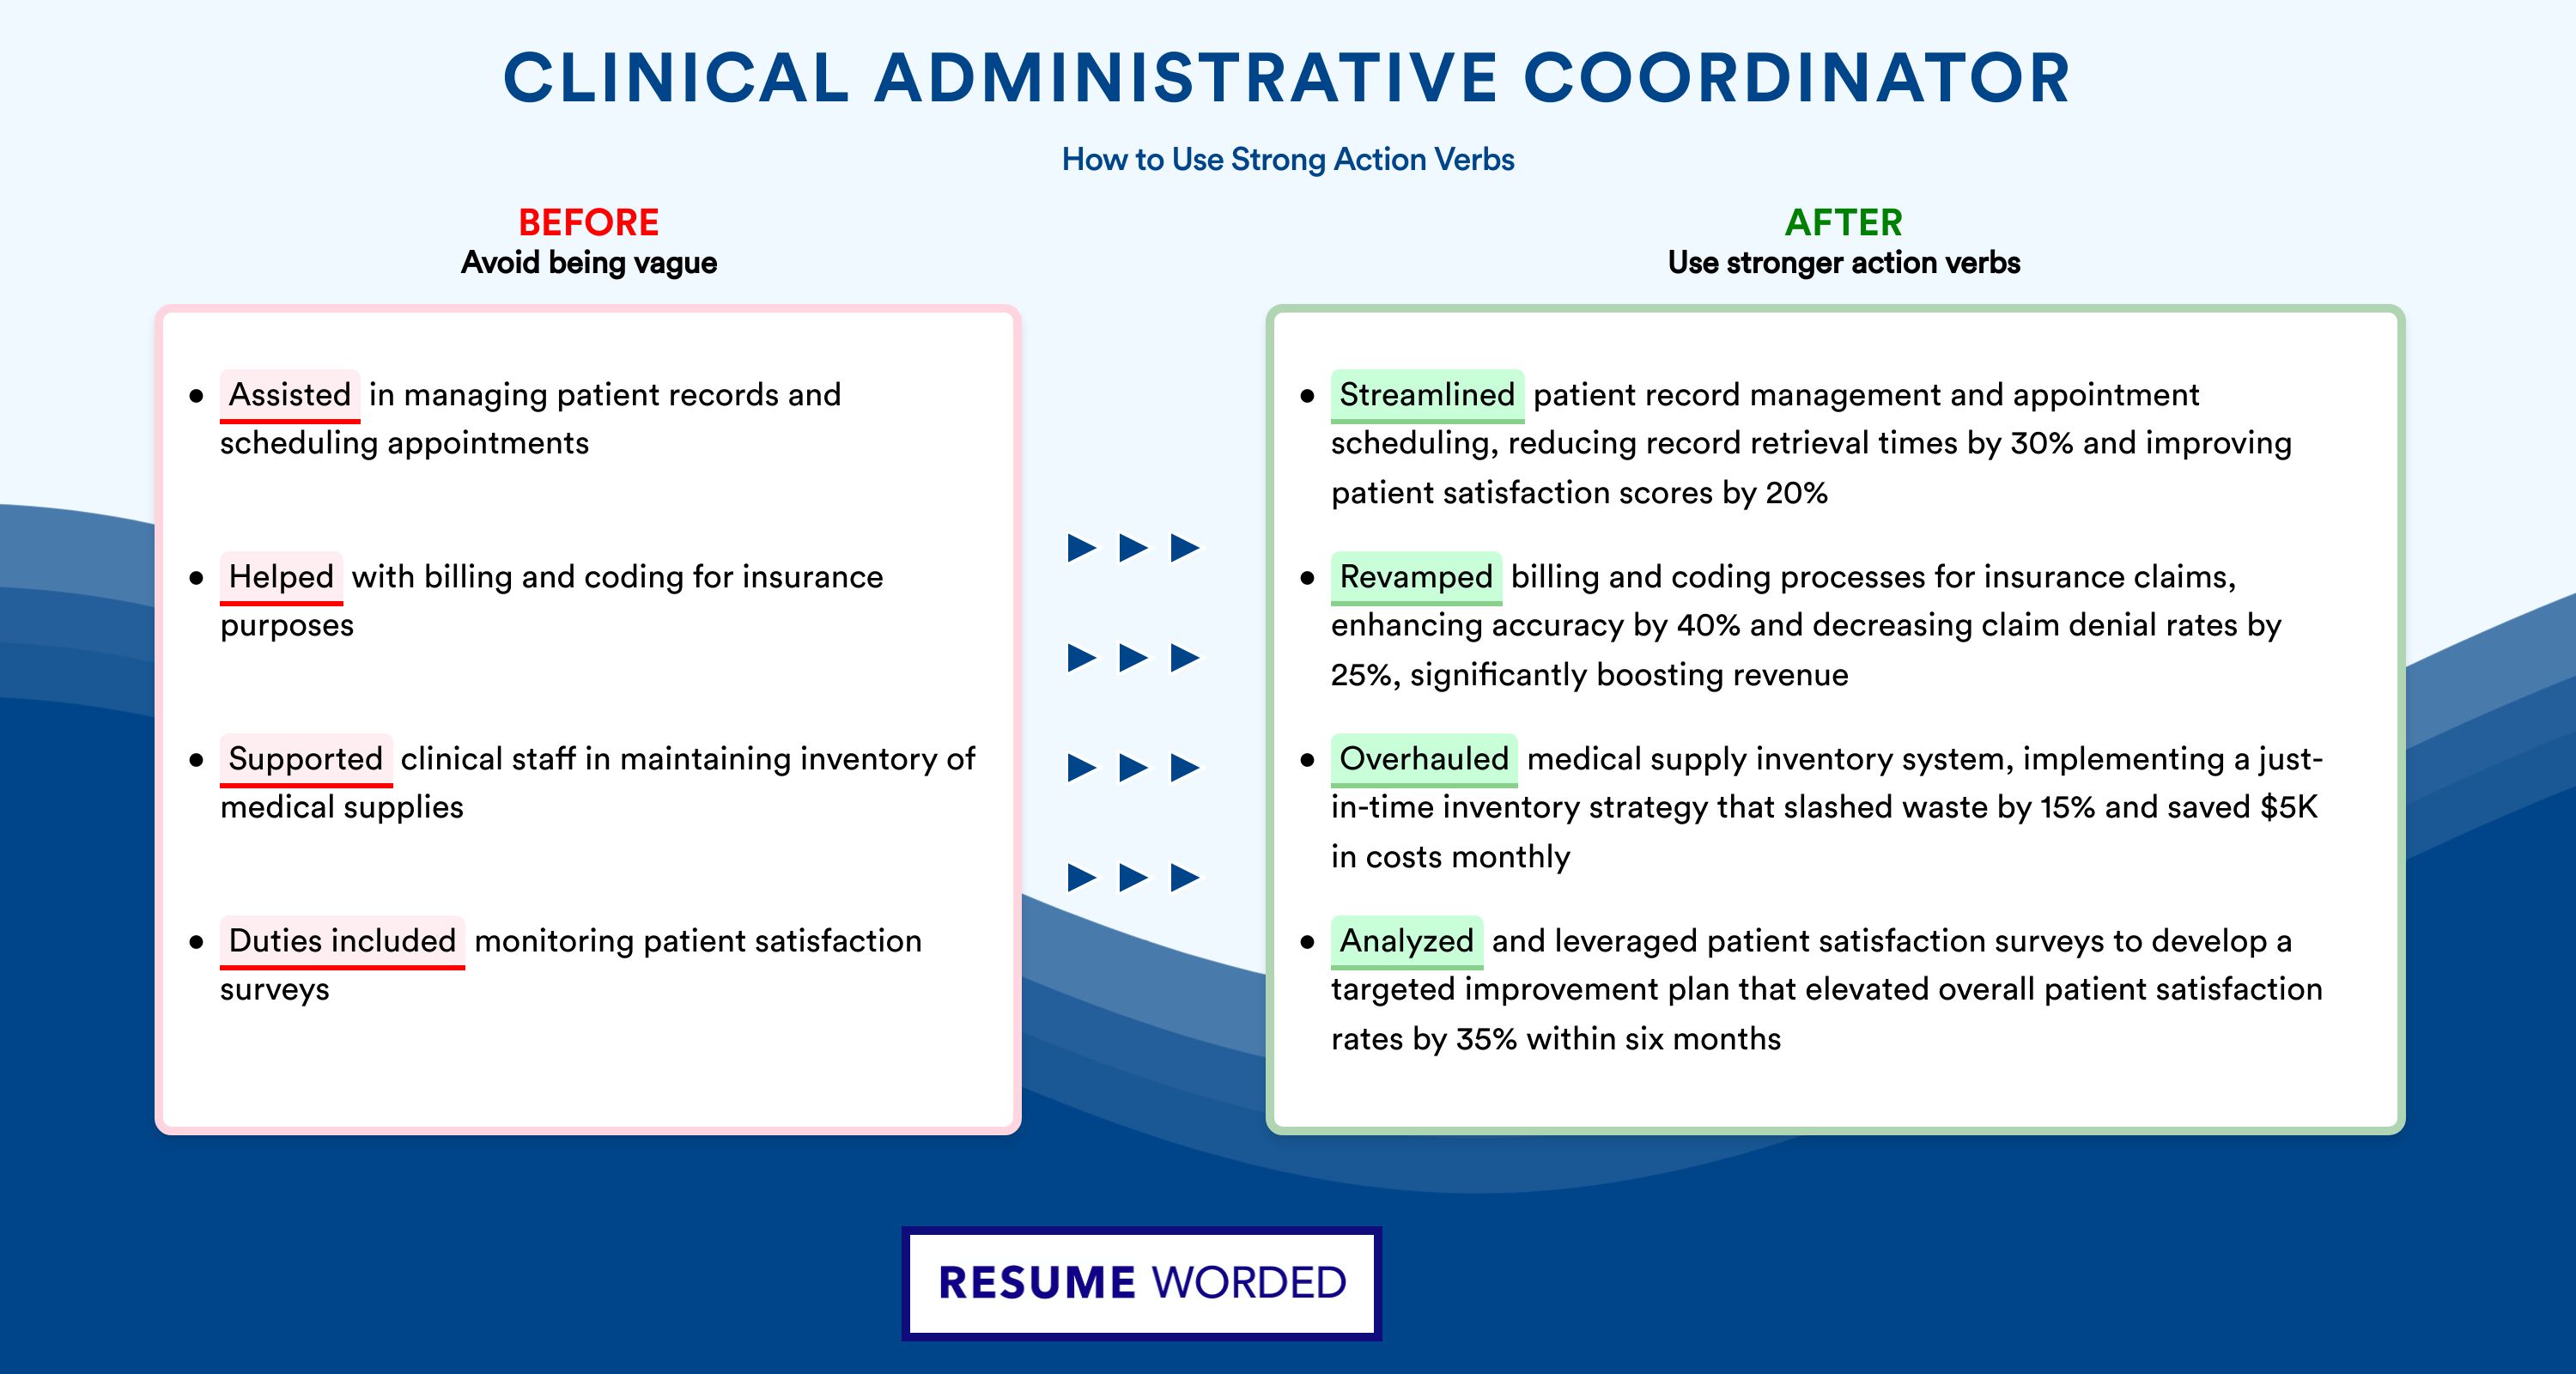 Action Verbs for Clinical Administrative Coordinator